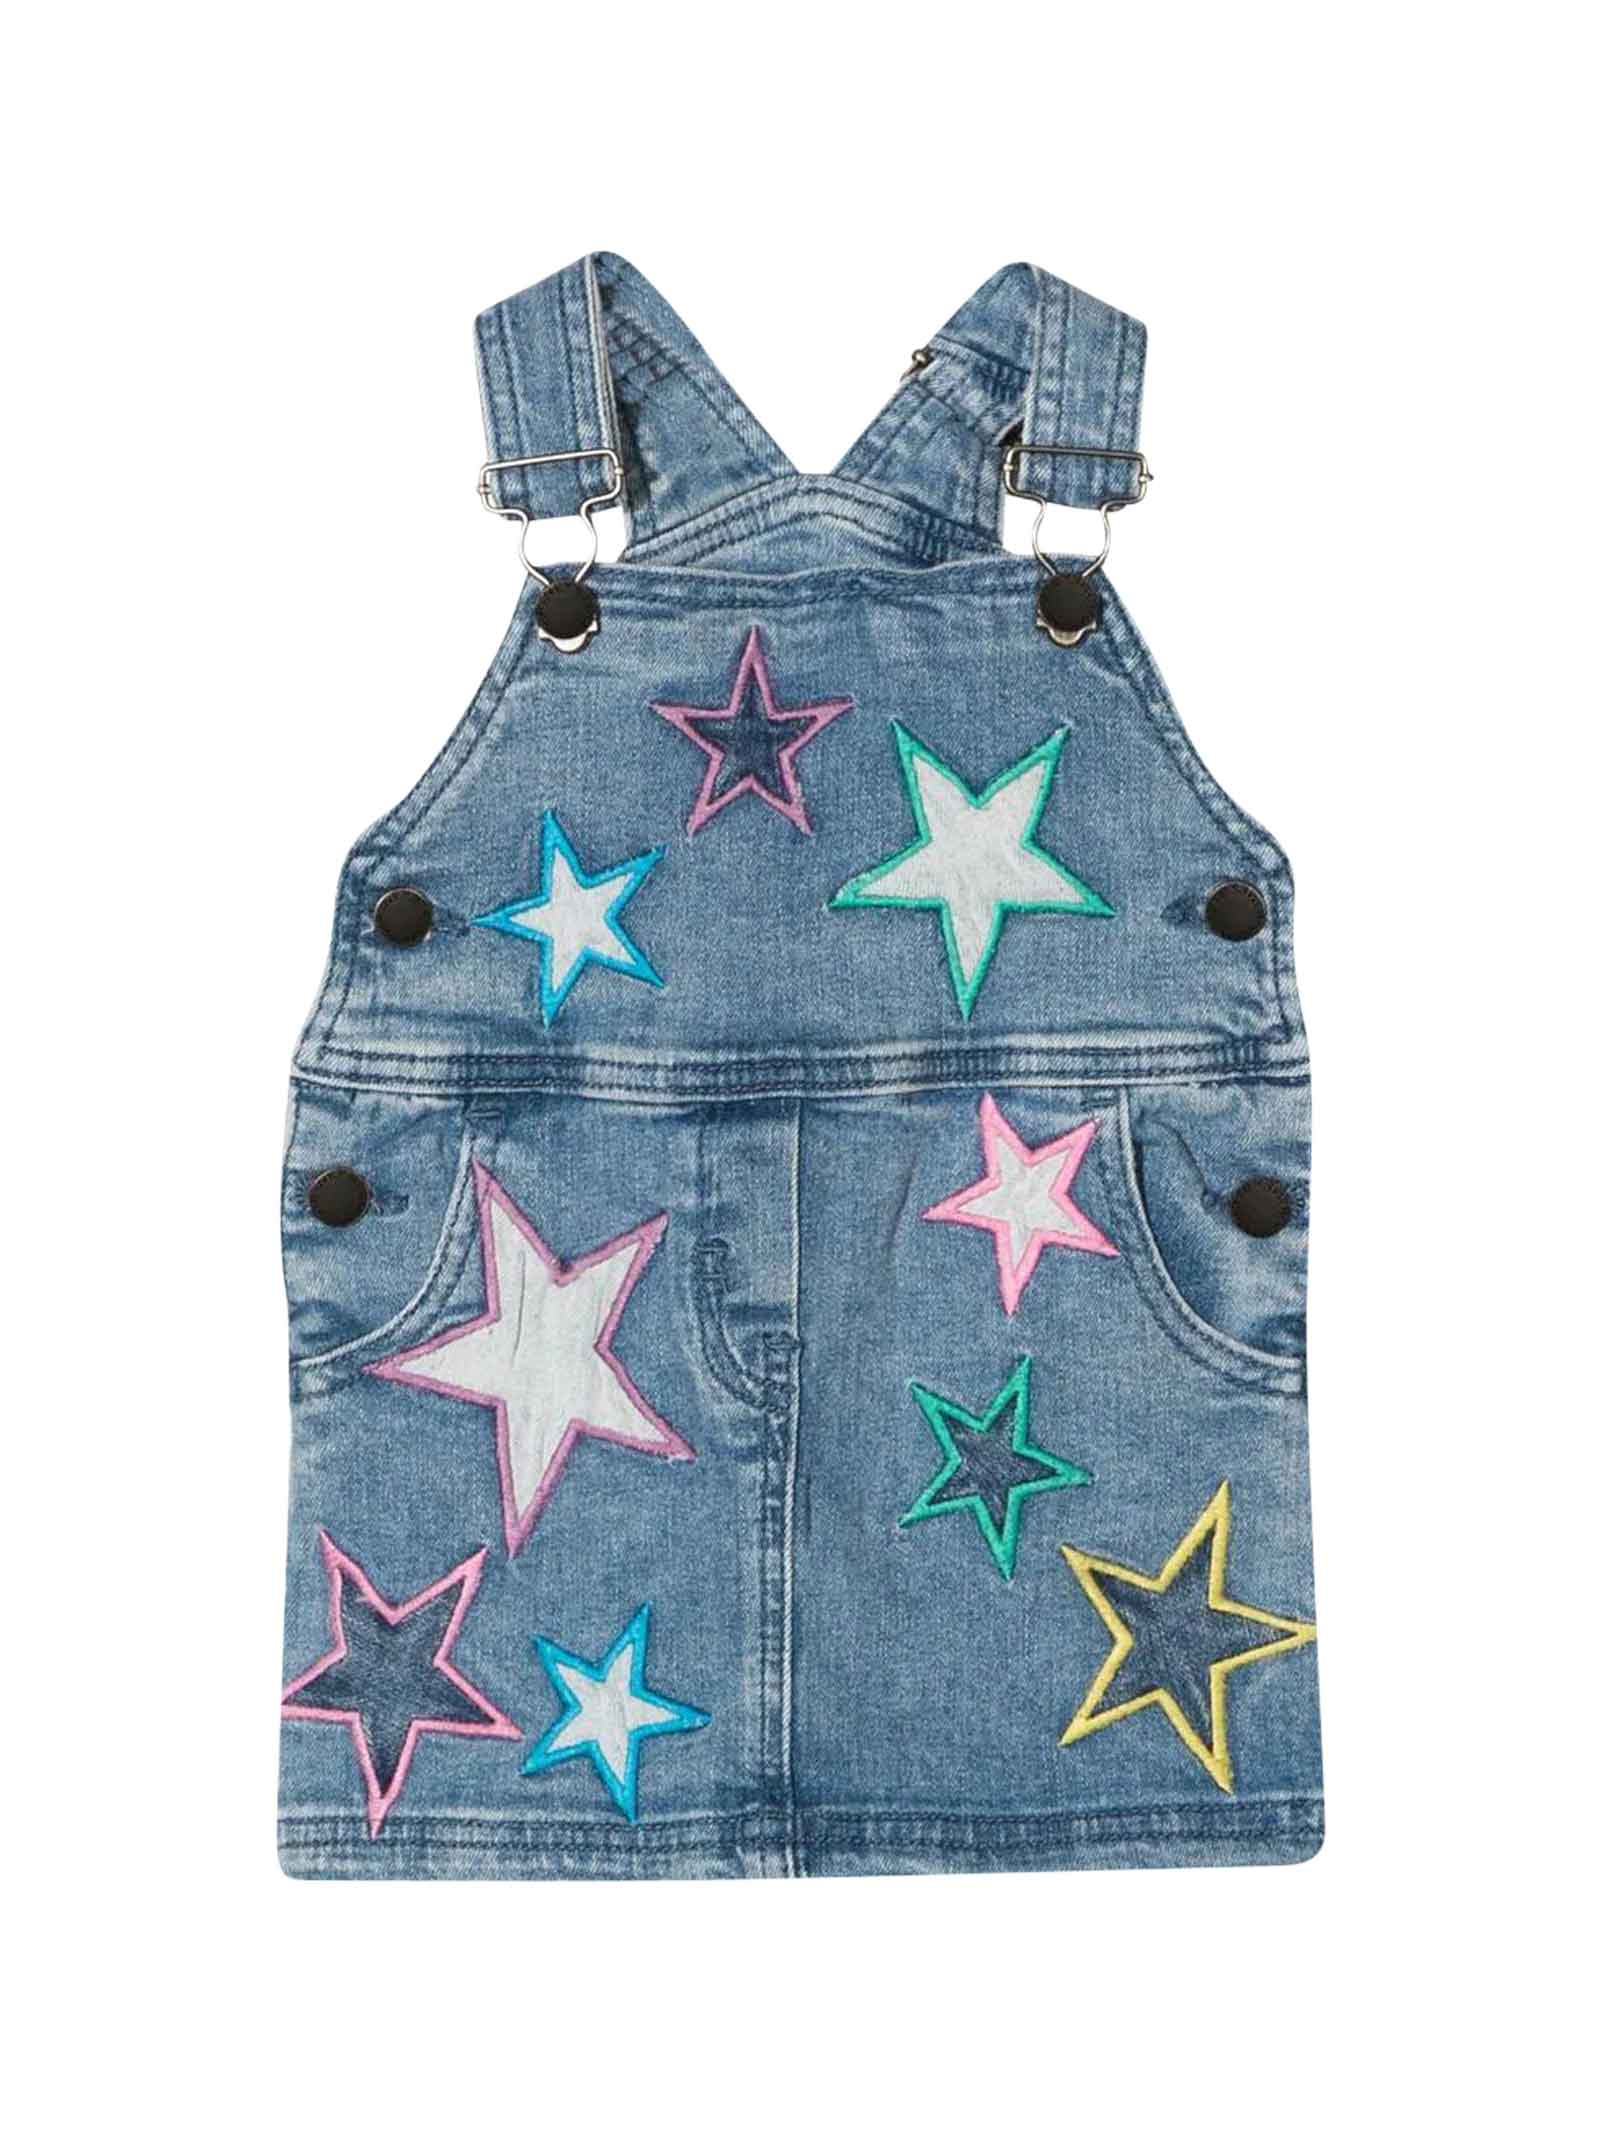 Buy Cotton Dungaree Dress for Infant Babies Online | Smiley Buttons